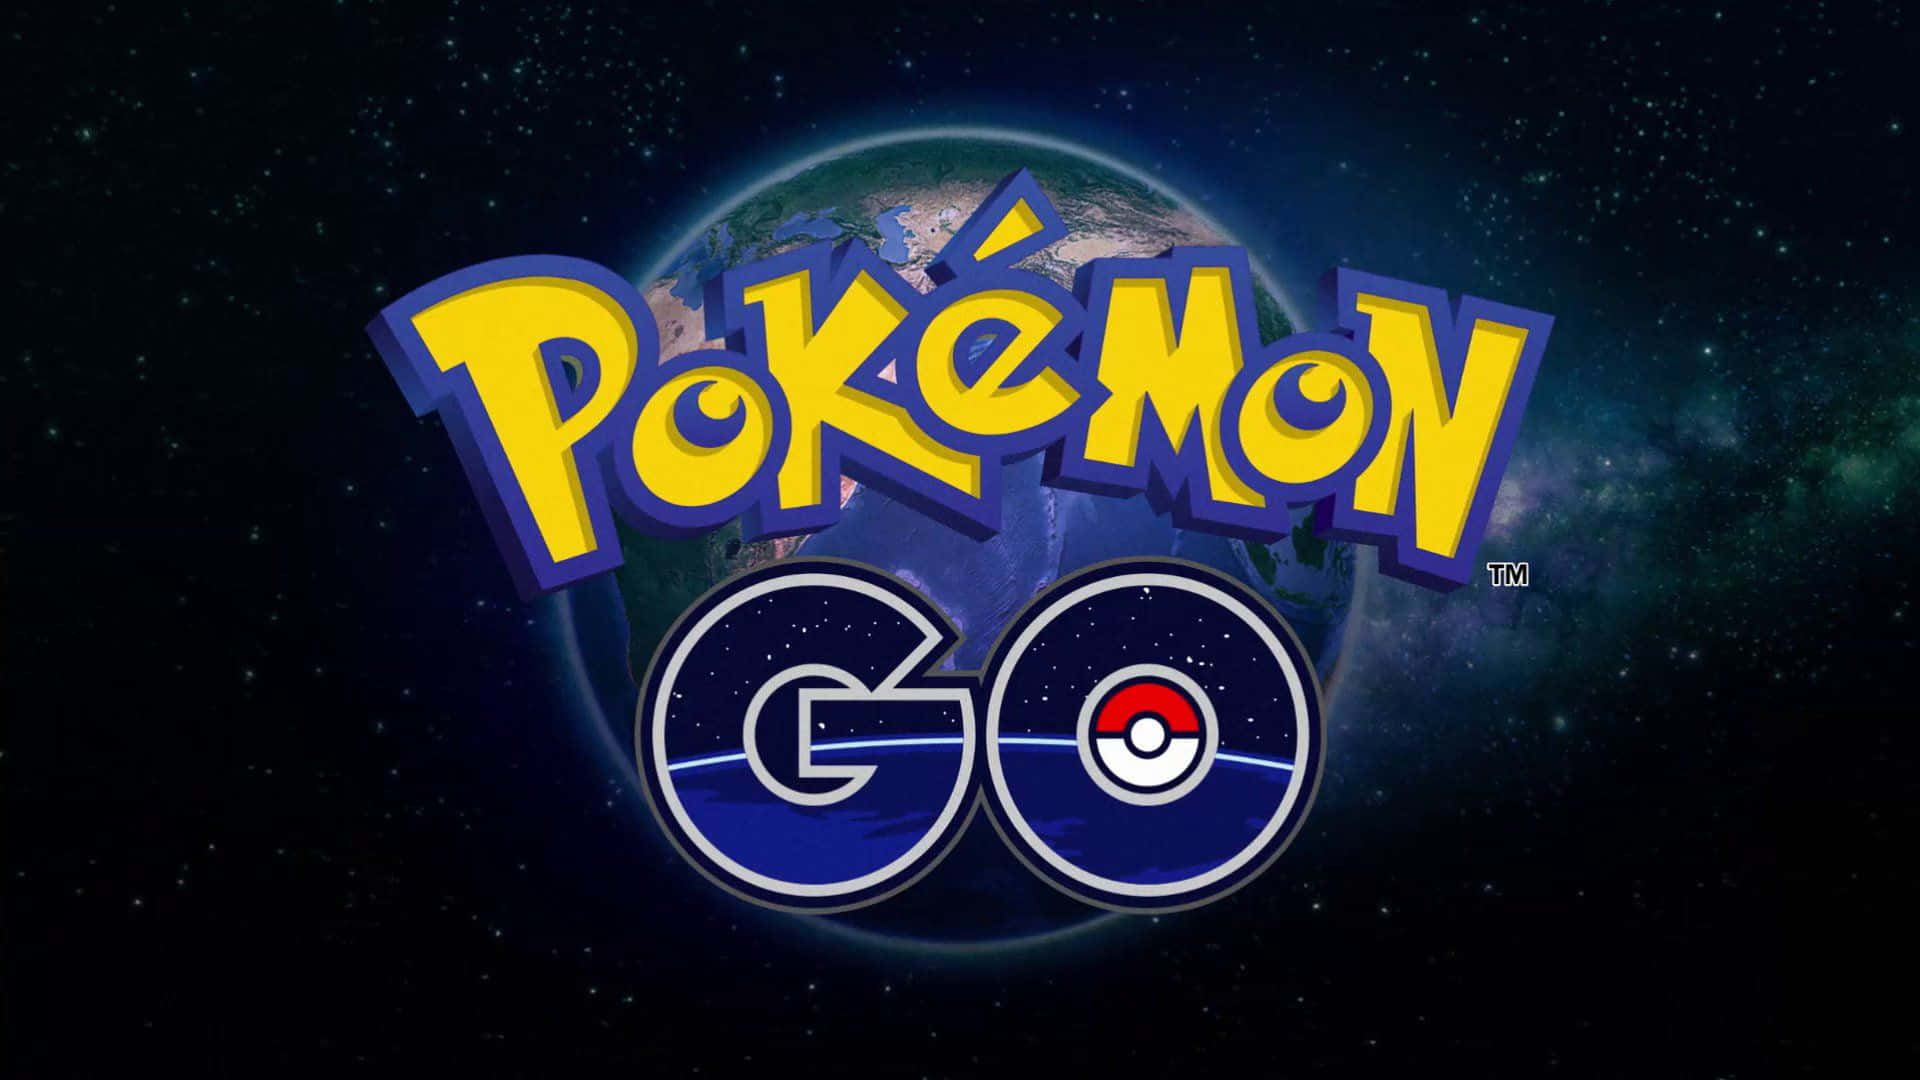 Pokemon Go Logo With A Space Background Wallpaper